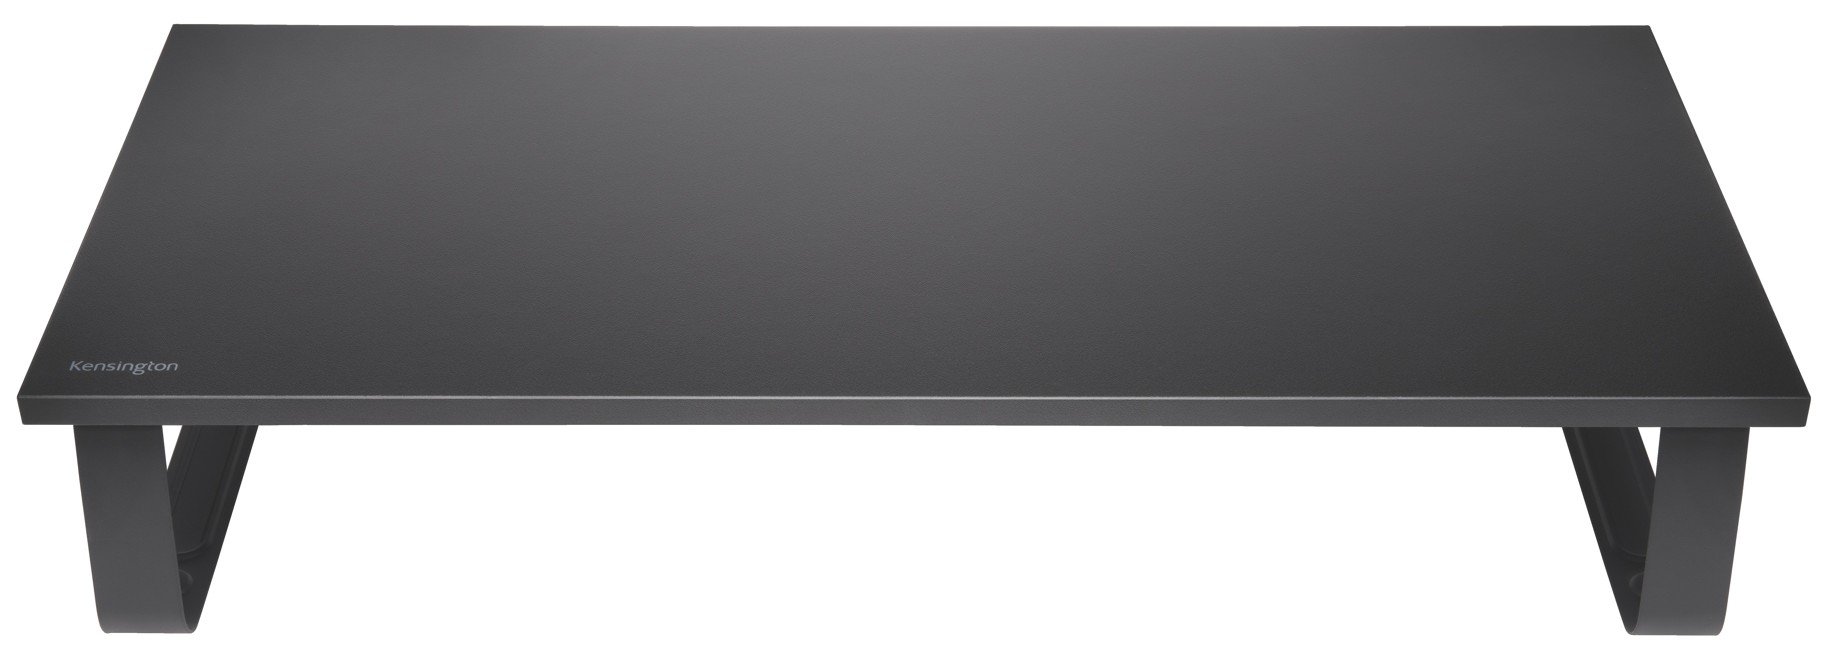 Kensington - Monitor stand extra wide - Black